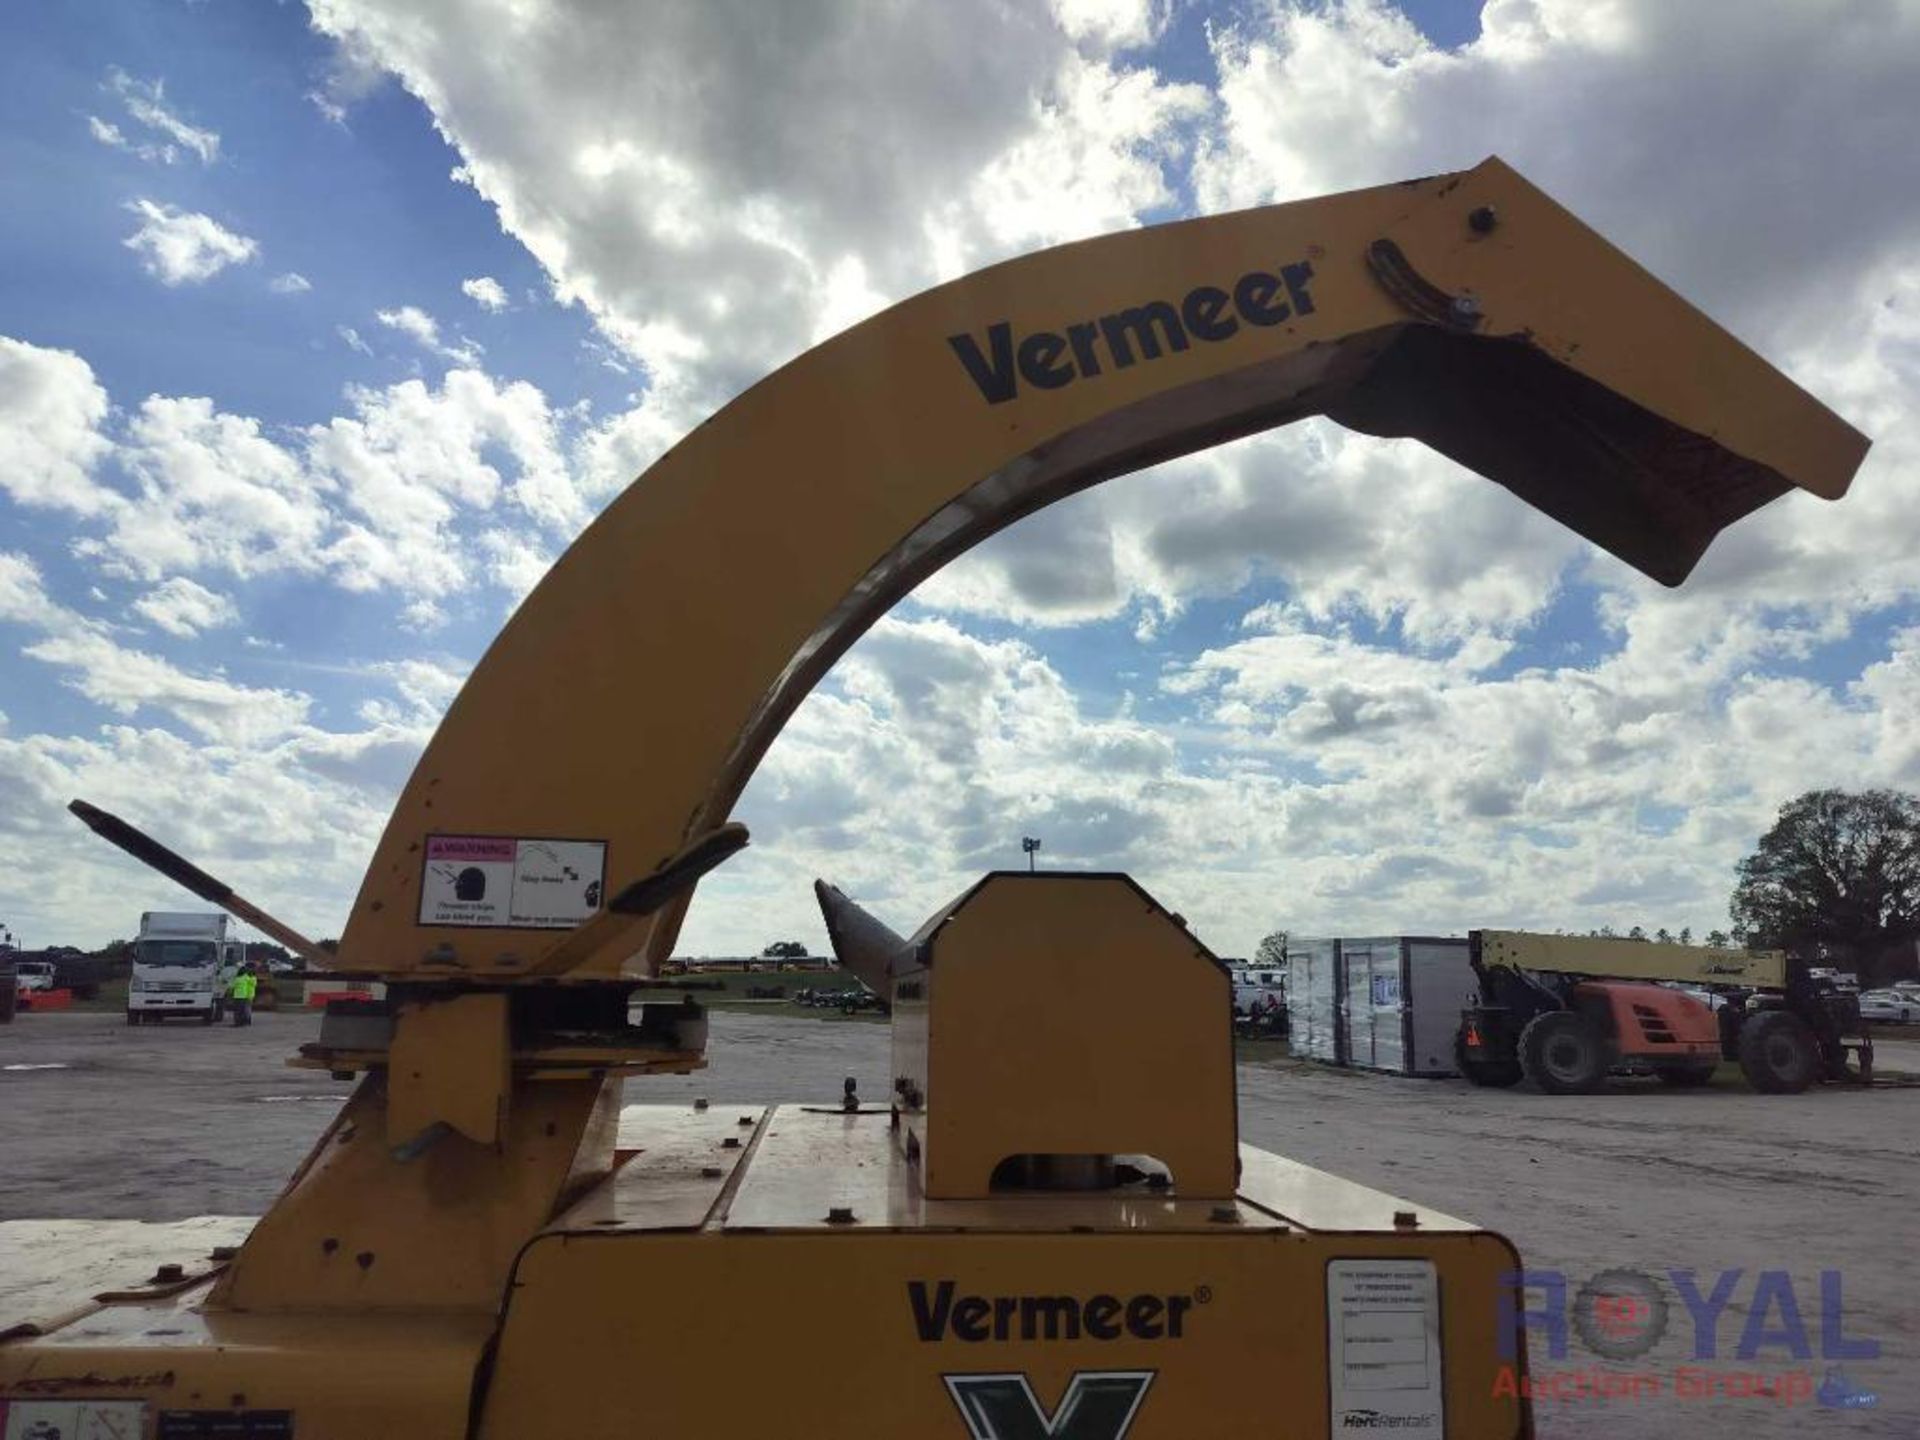 2015 Vermeer BC1000XL S/A Towable Brush Chipper - Image 6 of 18